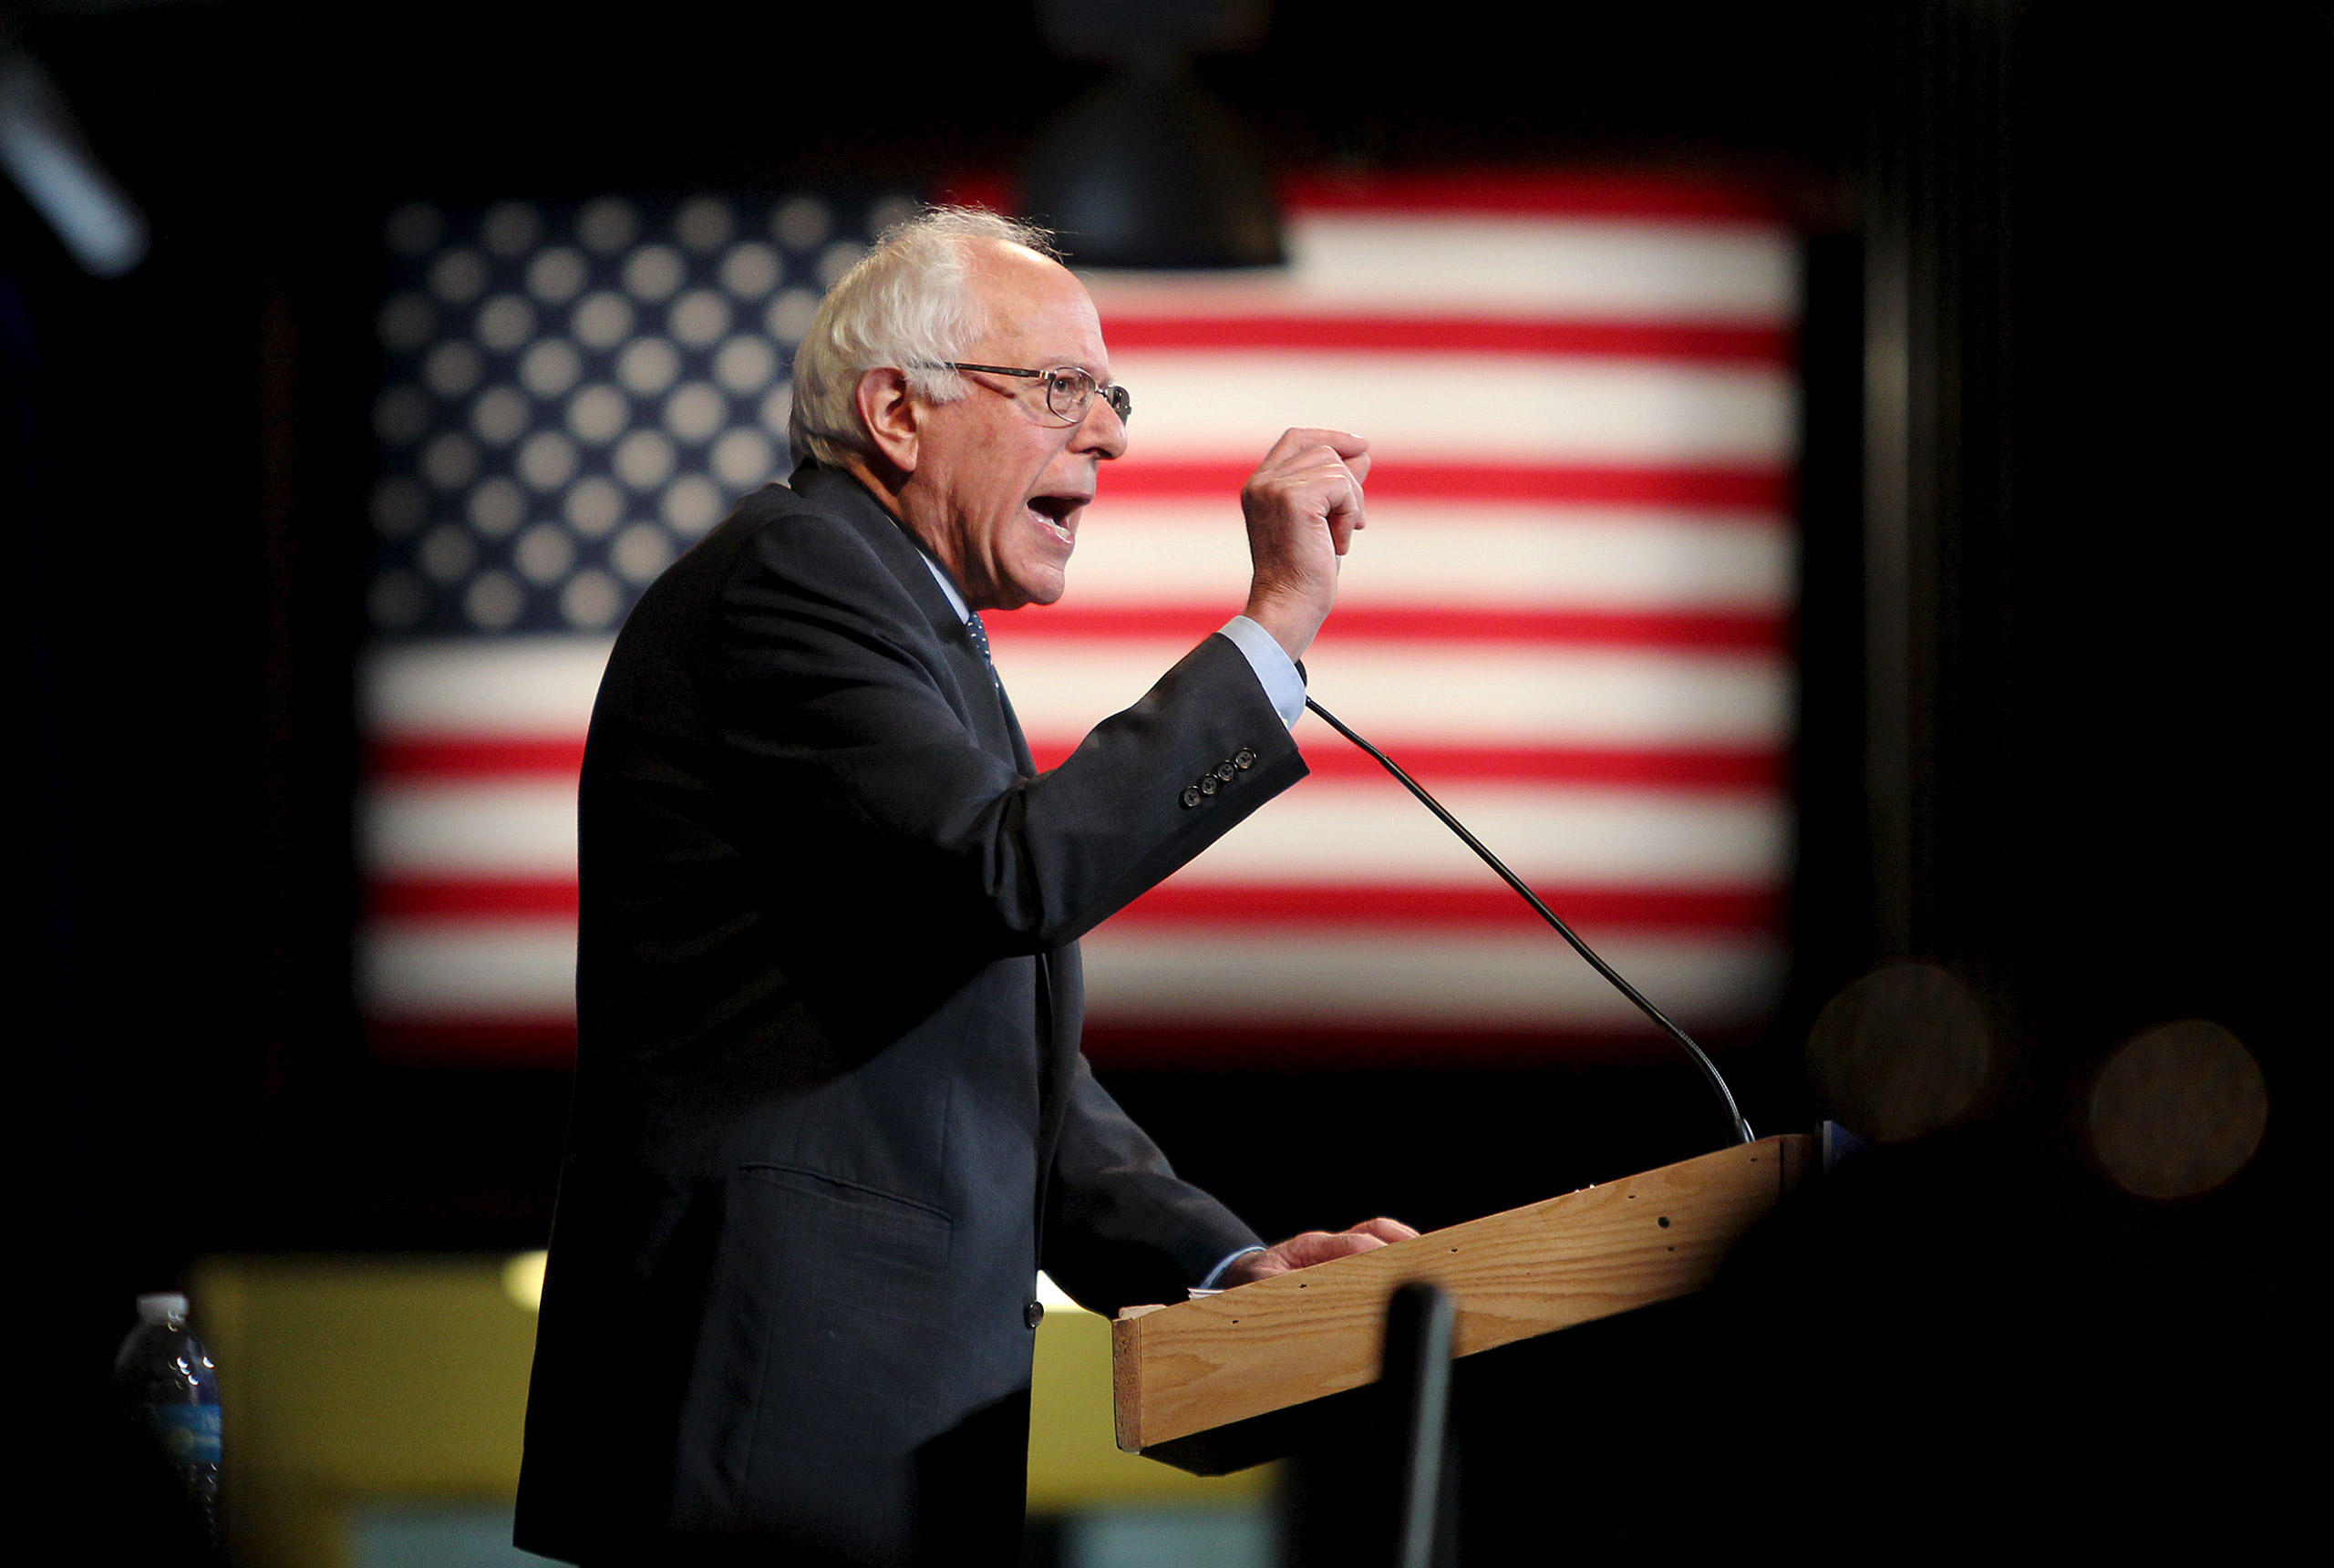 U.S. Democratic presidential candidate and U.S. Senator Bernie Sanders speaks at the New Hampshire Democratic Party's Jefferson Jackson dinner in Manchester, N.H., on Nov. 29, 2015. (Mary Schwalm—Reuters)